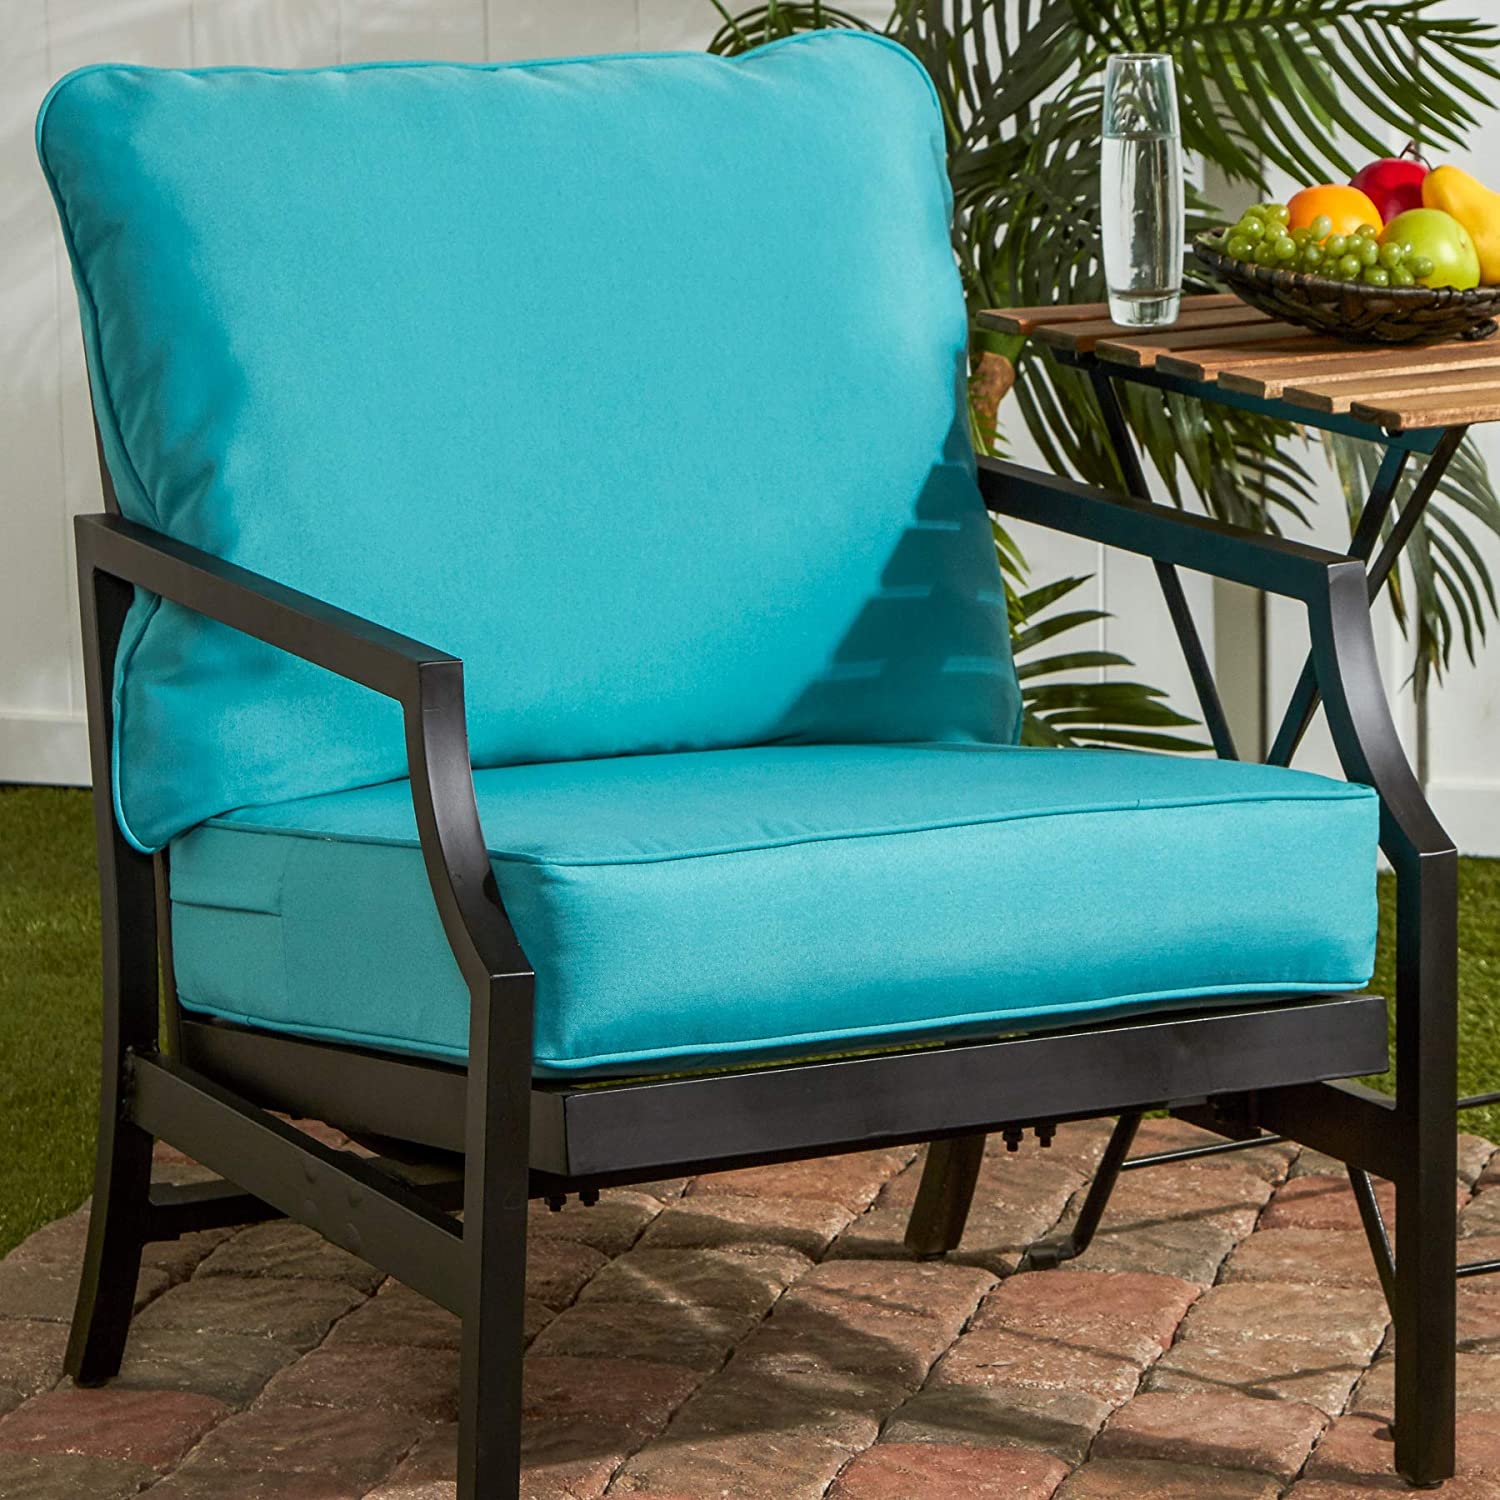 South Pine Porch Solid Teal 2-Piece Outdoor Deep Seat Cushion Set.